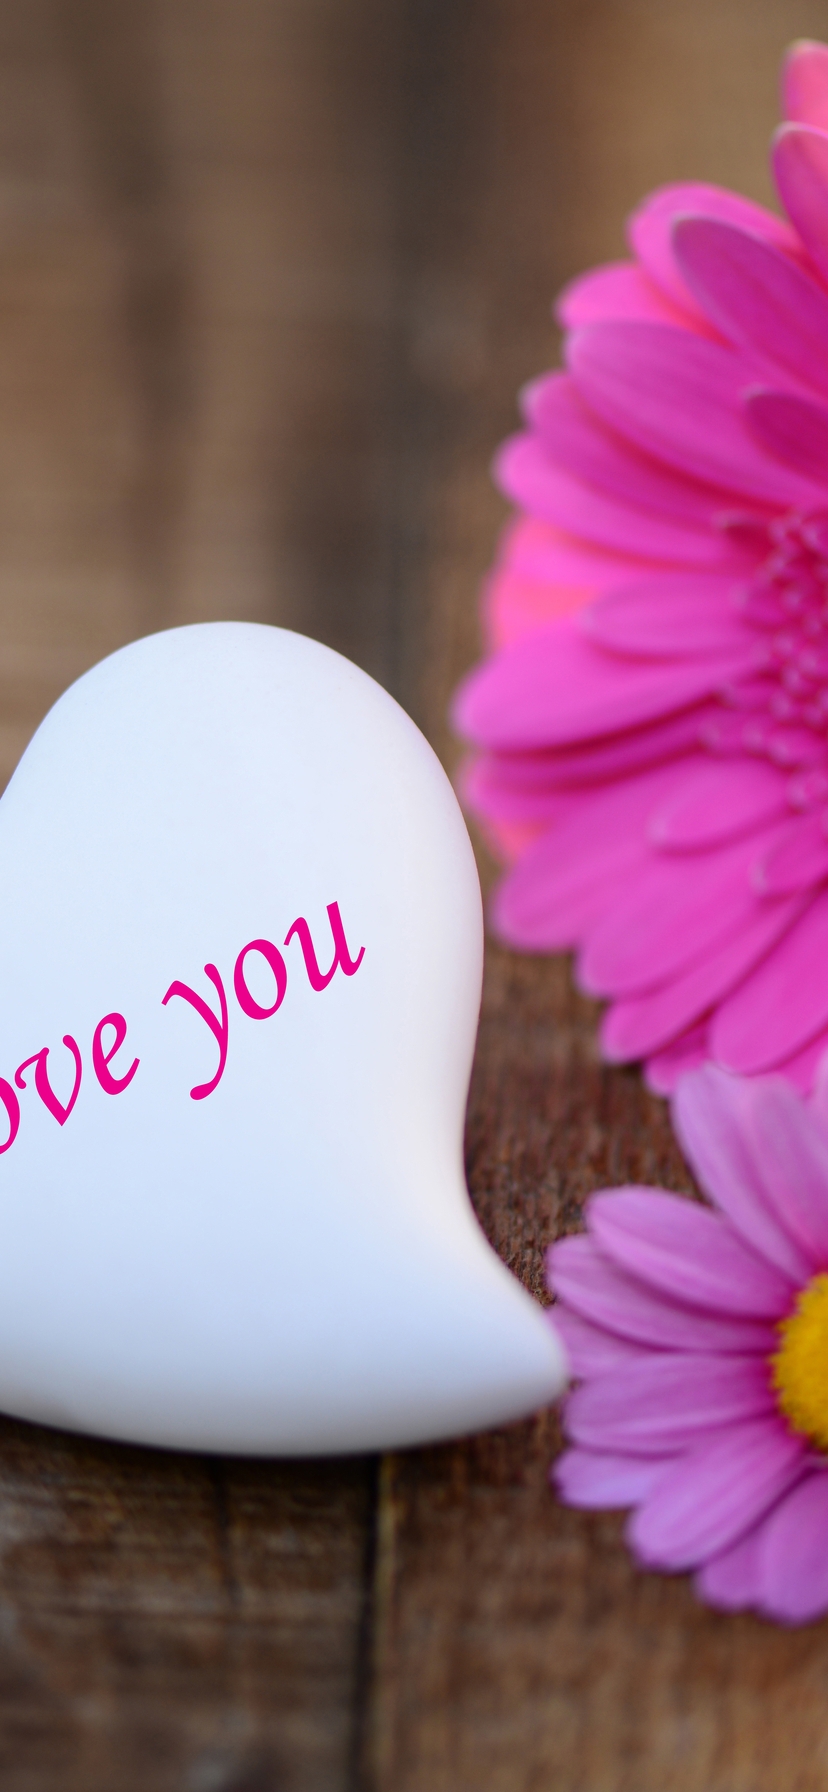 Image: Flowers, petals, heart, love, recognition, I Love you